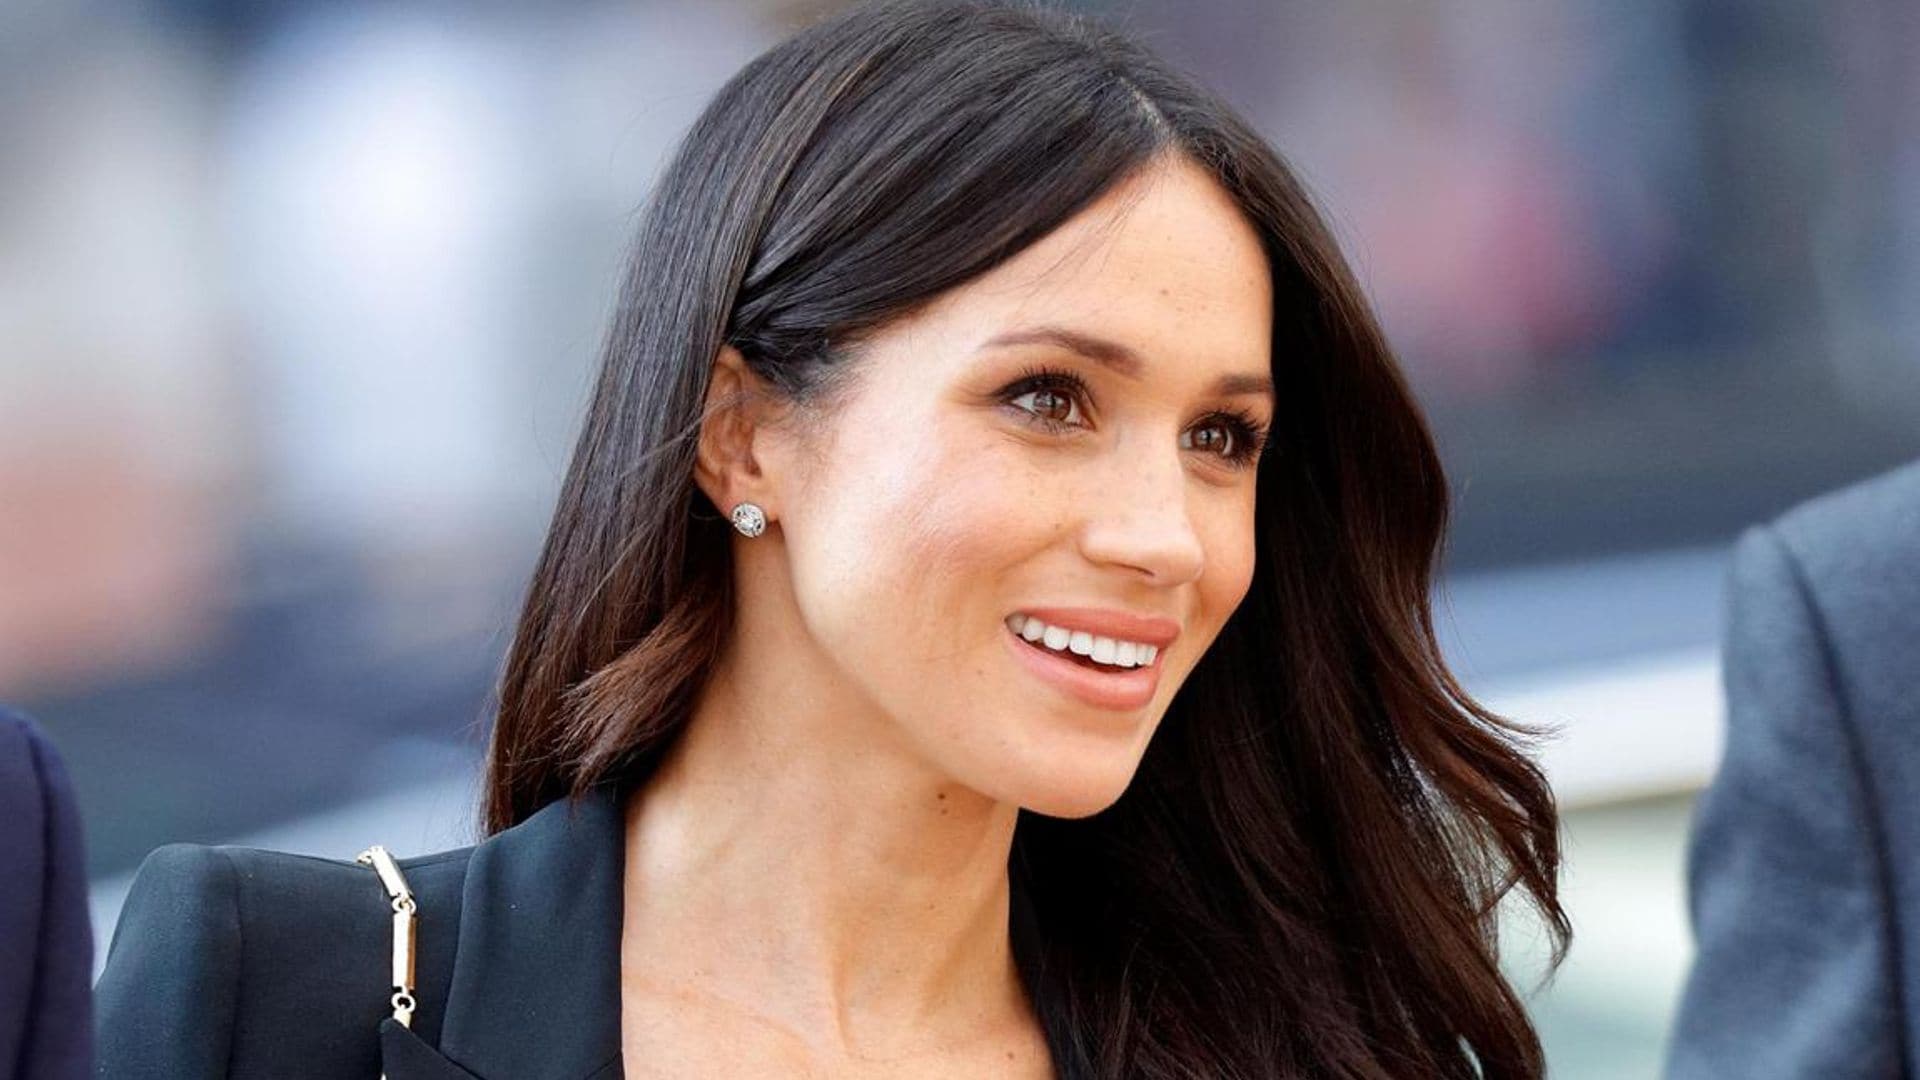 Meghan Markle just wore shoes made out of water bottles